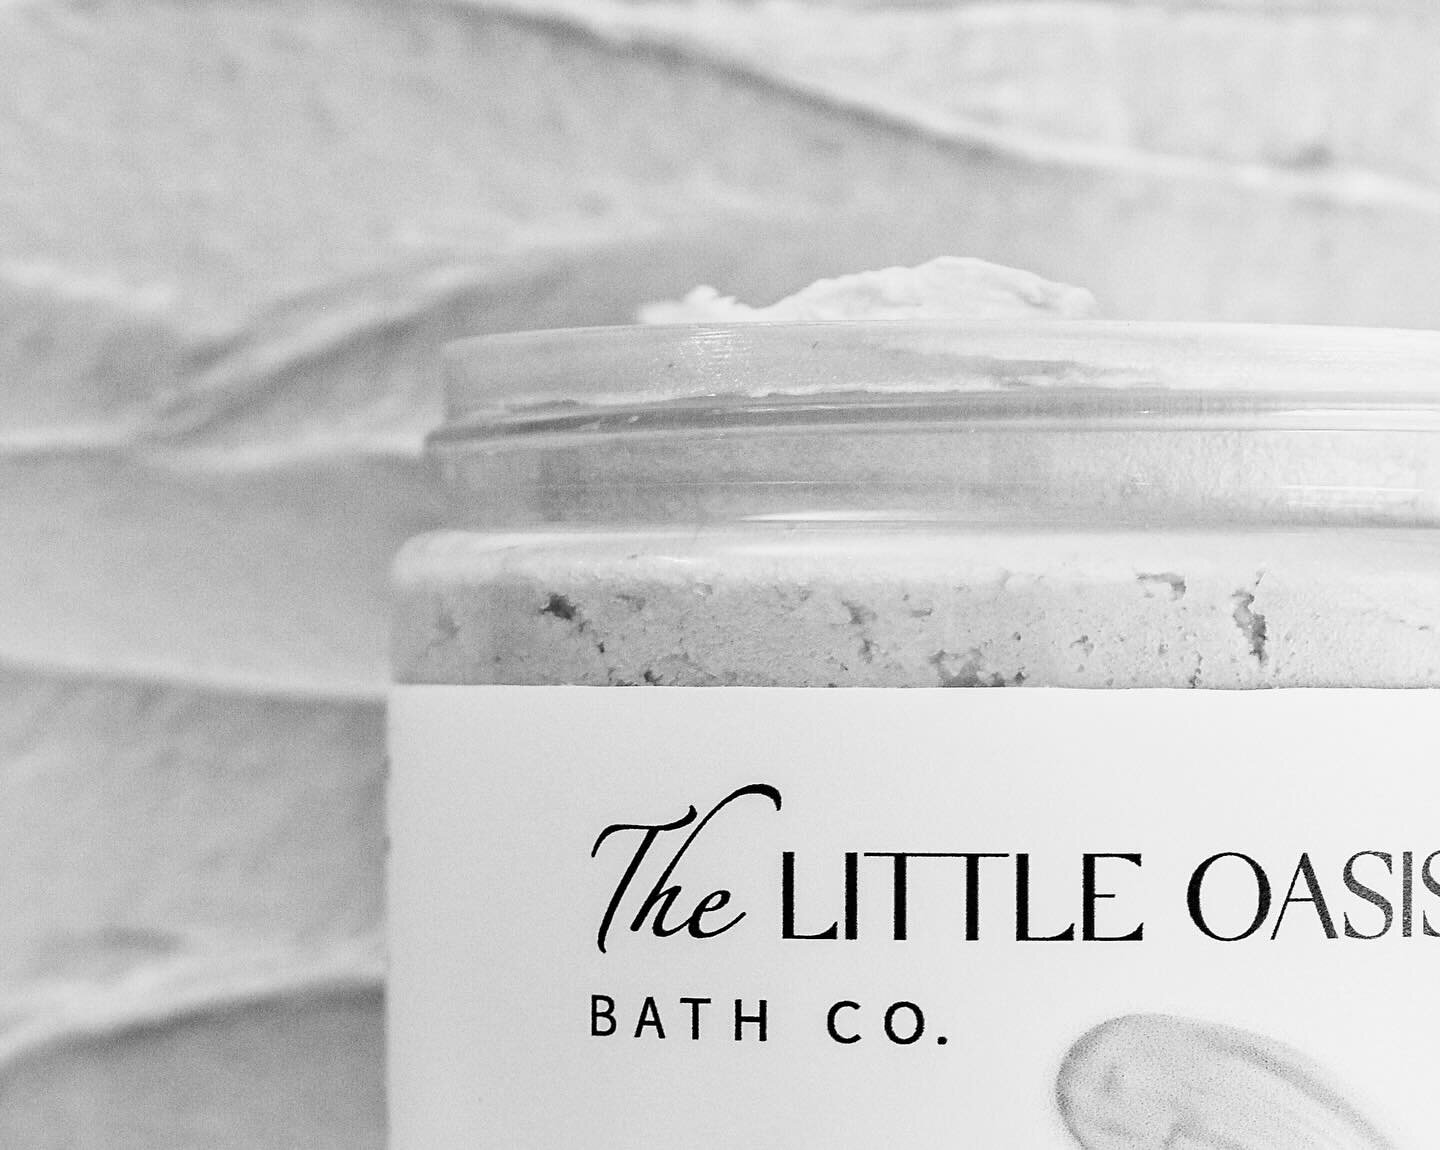 Monochrome or full colour? Which you prefer? ✨🤔

Swipe across to reveal the coloured image. Tell us your fav in the poll below! 🙌

Also&hellip; Any guesses what this new @thelittleoasisbathco product is? 🤫

#productphotographer #productphotography